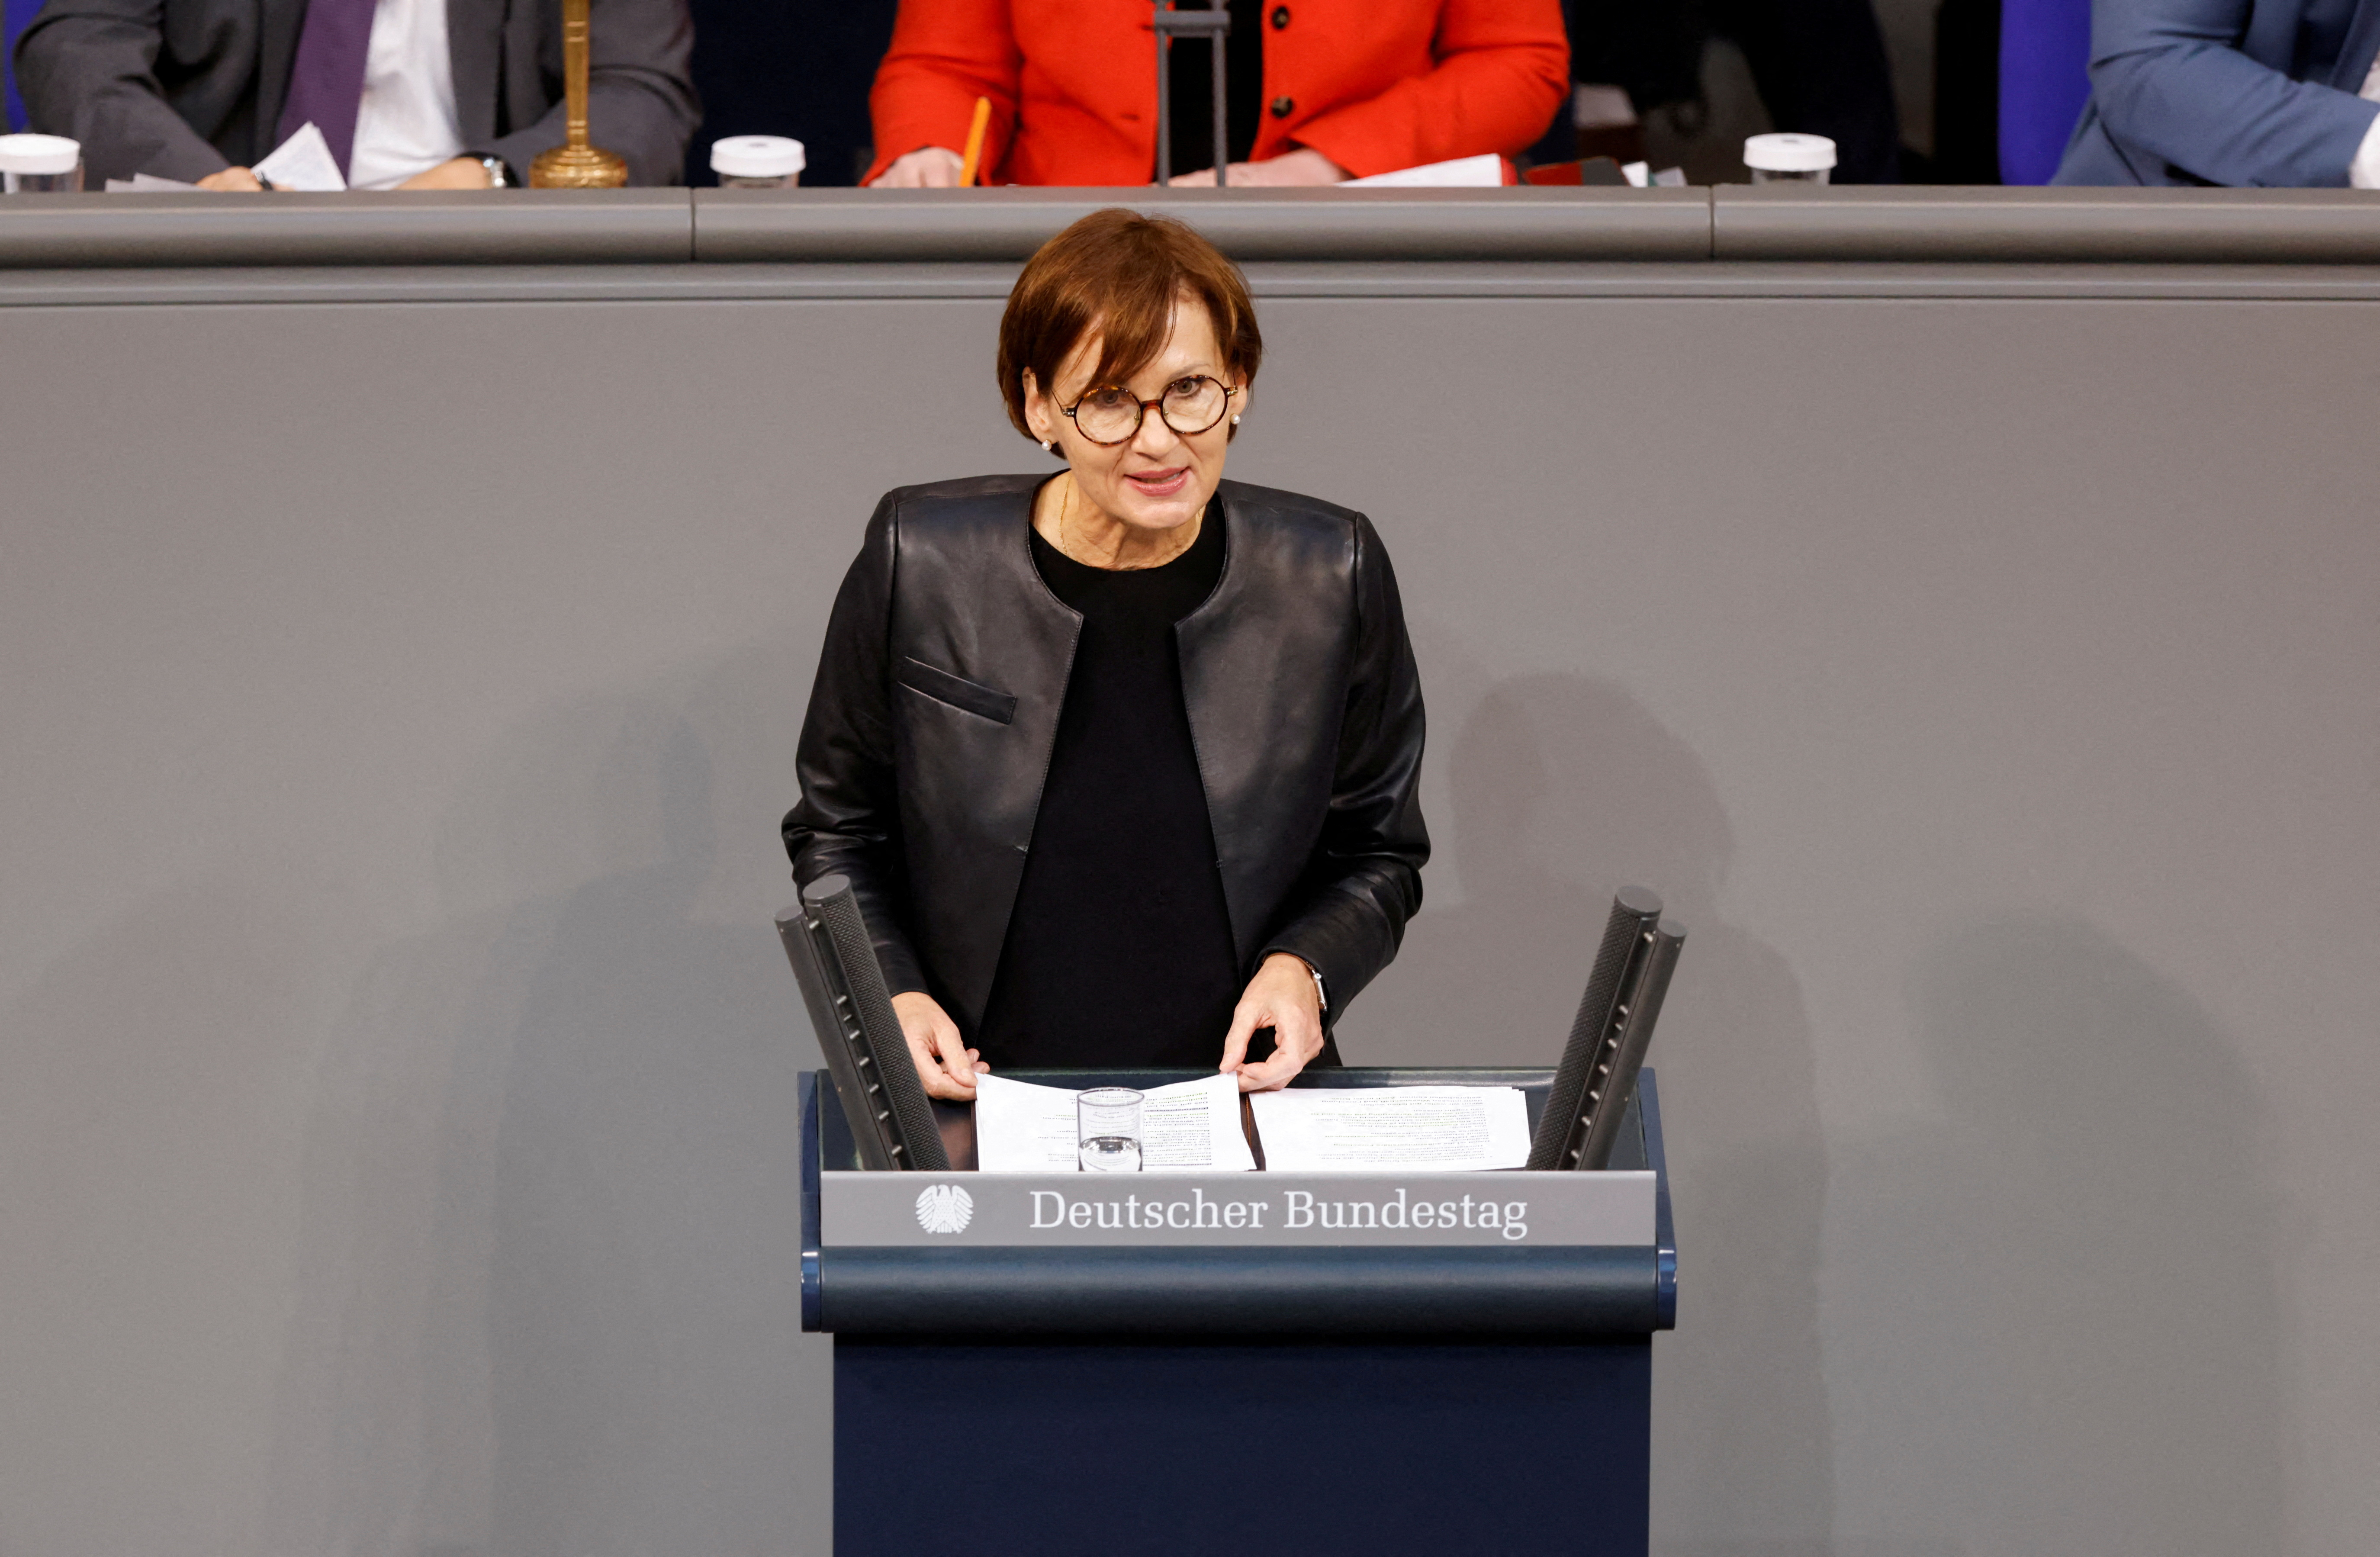 Session of the German lower house of parliament or the Bundestag